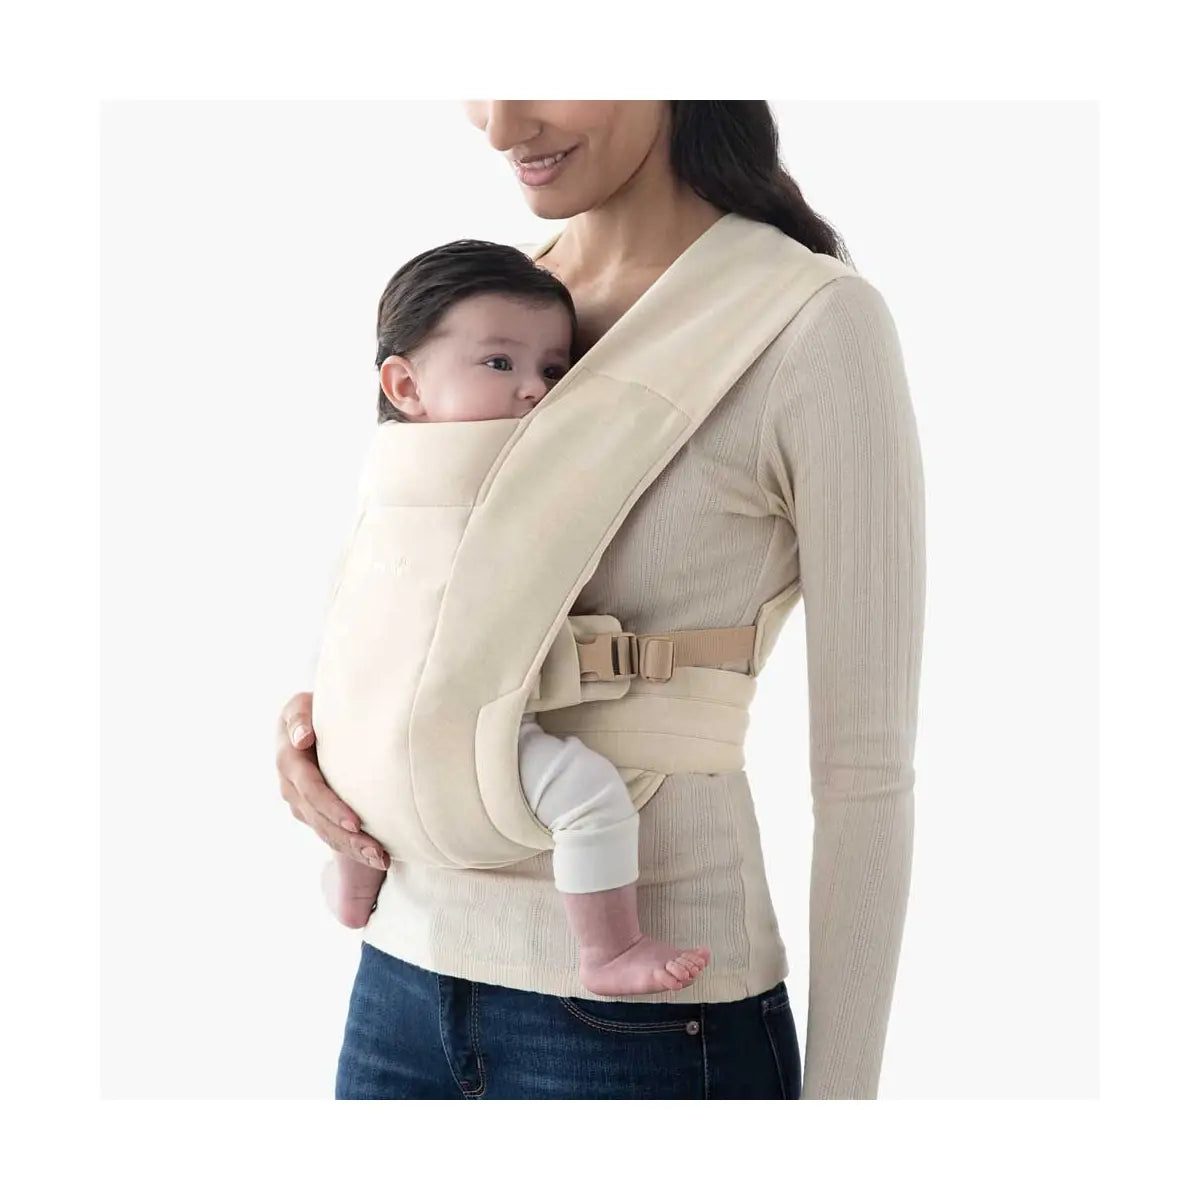 Ergobaby Carrier Adapt Embrace Soft Air Mesh - Cream - For Your Little One